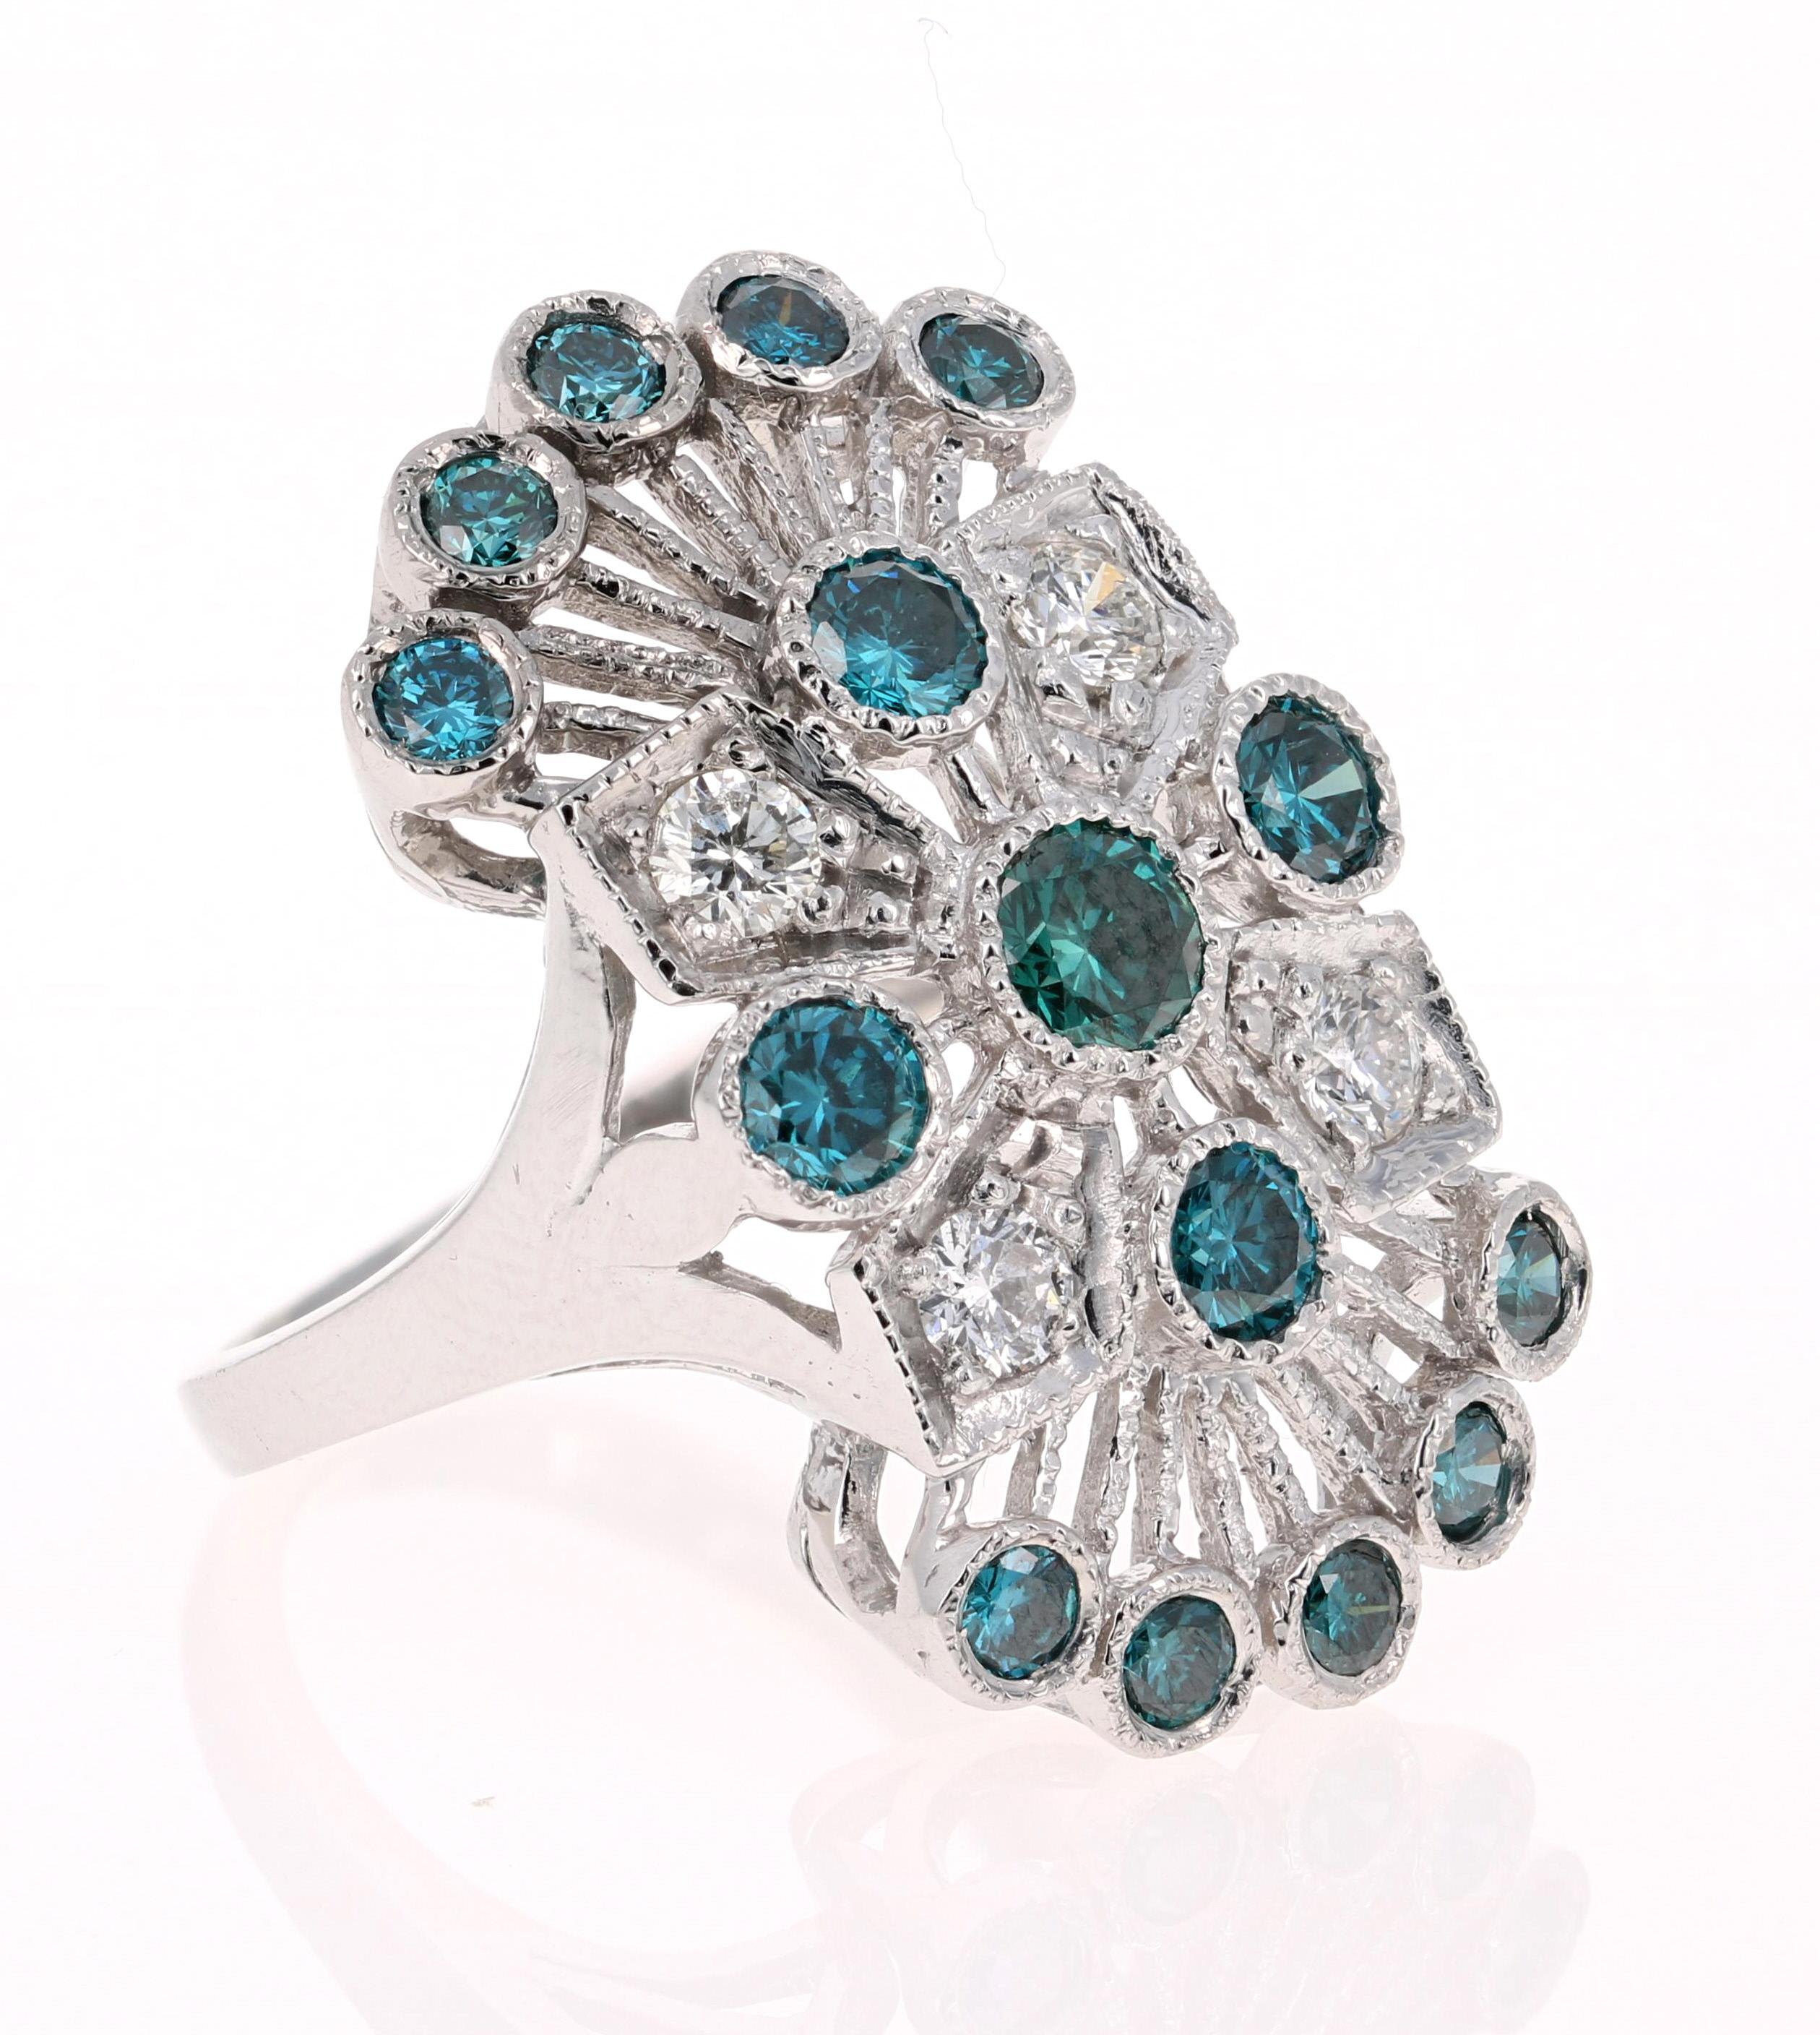 Gorgeous Statement Ring! 

This ring has 15 Round Cut Blue Diamonds that weigh 1.85 Carats and 4 Round Cut White Diamonds that weigh 0.48 Carats. (Clarity: SI, Color: F) The total carat weight of the ring is 2.33 Carats. 

It is curated in 14 Karat